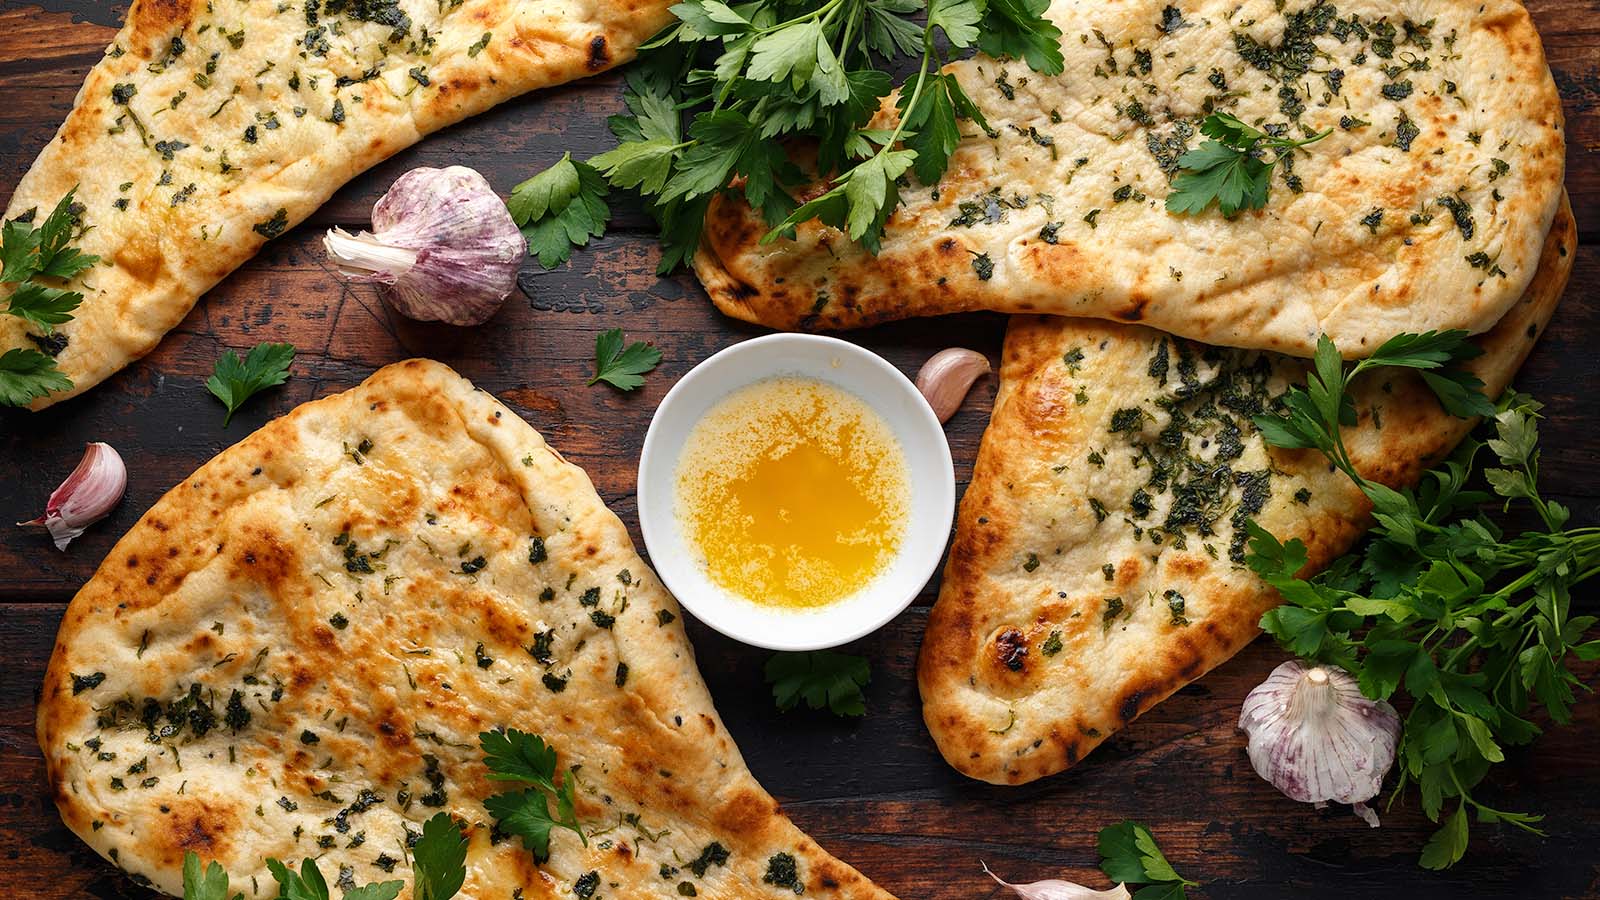 Indian naan bread with garlic butter on wooden table